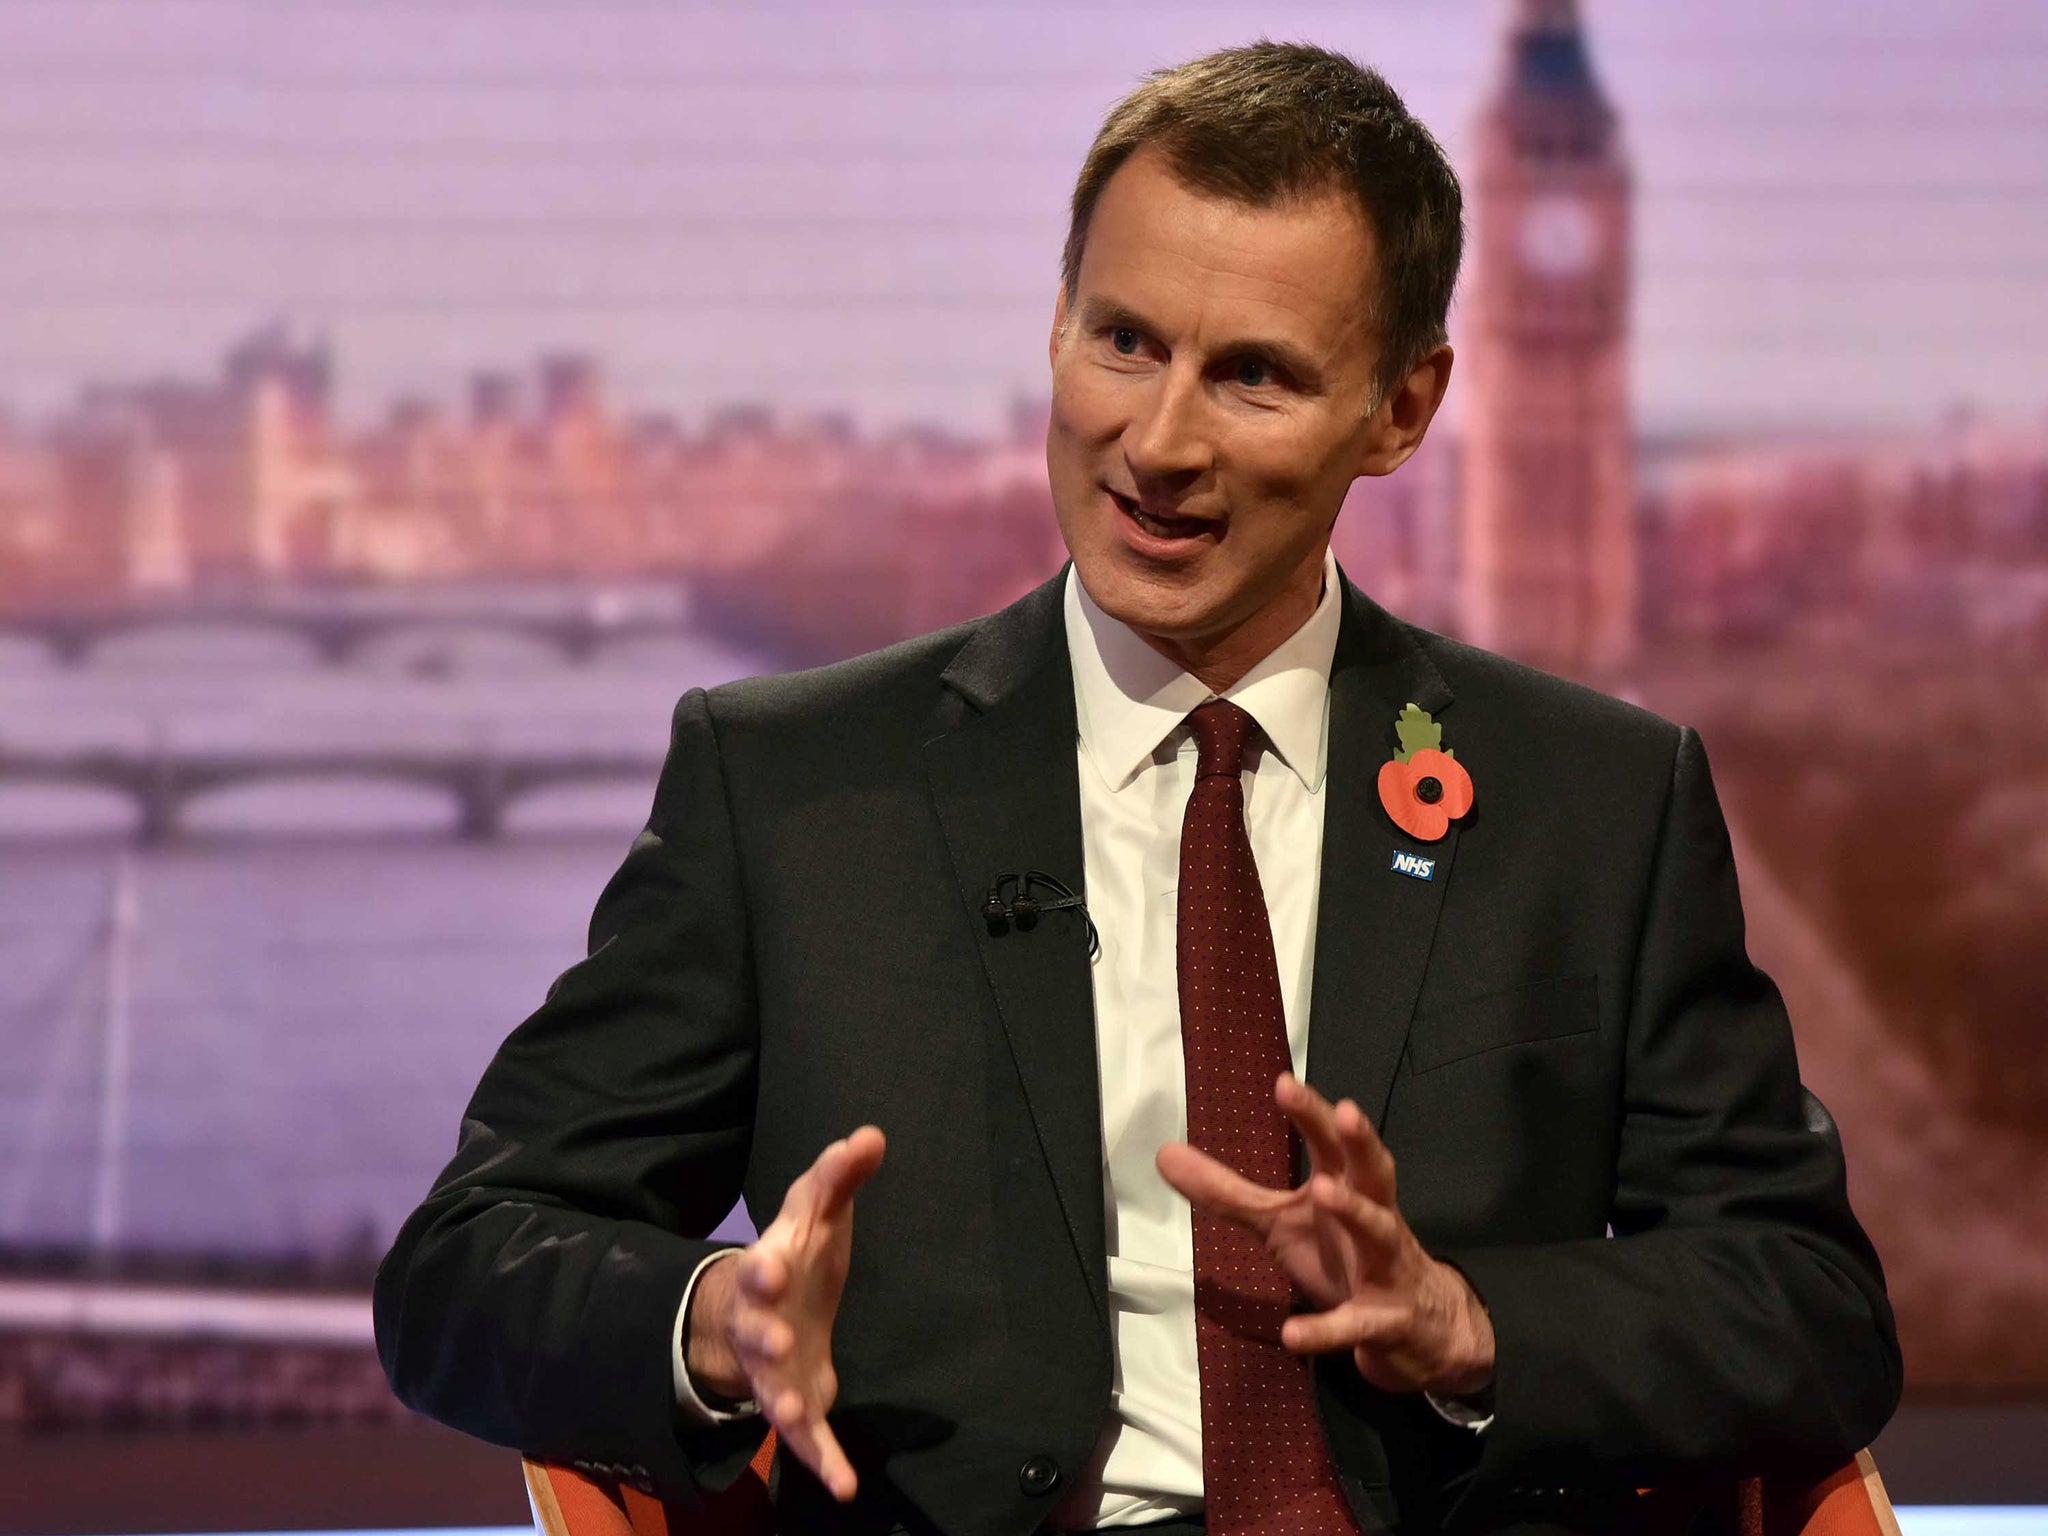 Jeremy Hunt questioned whether the plans were evidence of the social media giant acting responsibly